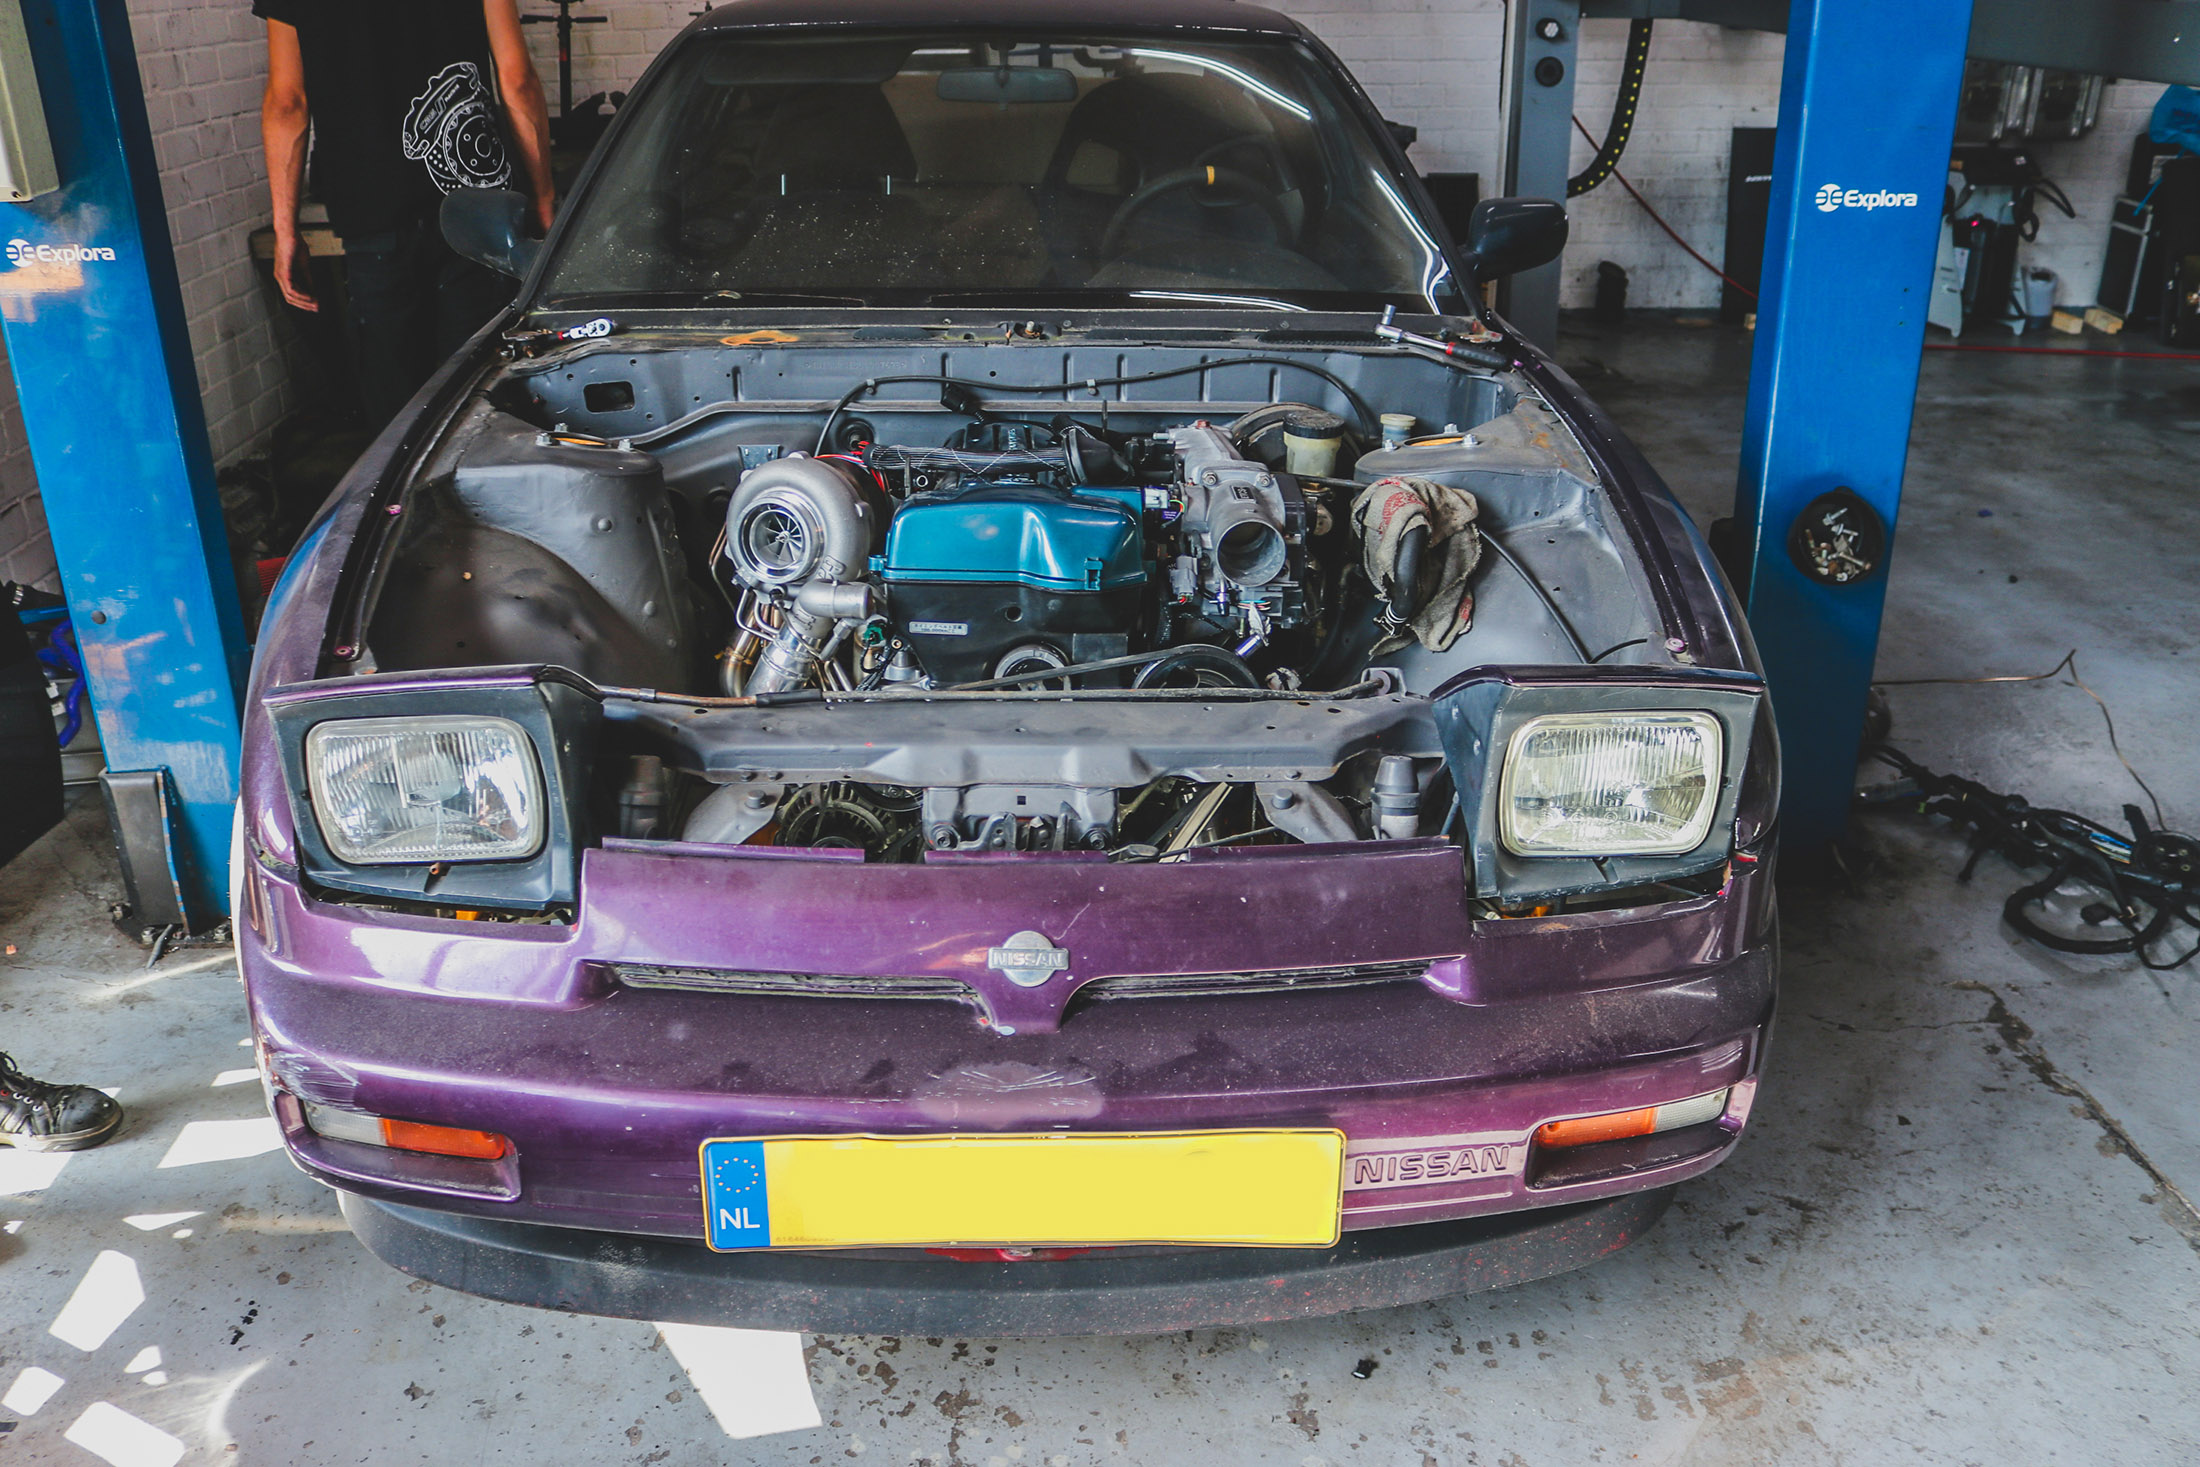 Super Golf with a Twin-Turbo V6 – Engine Swap Depot